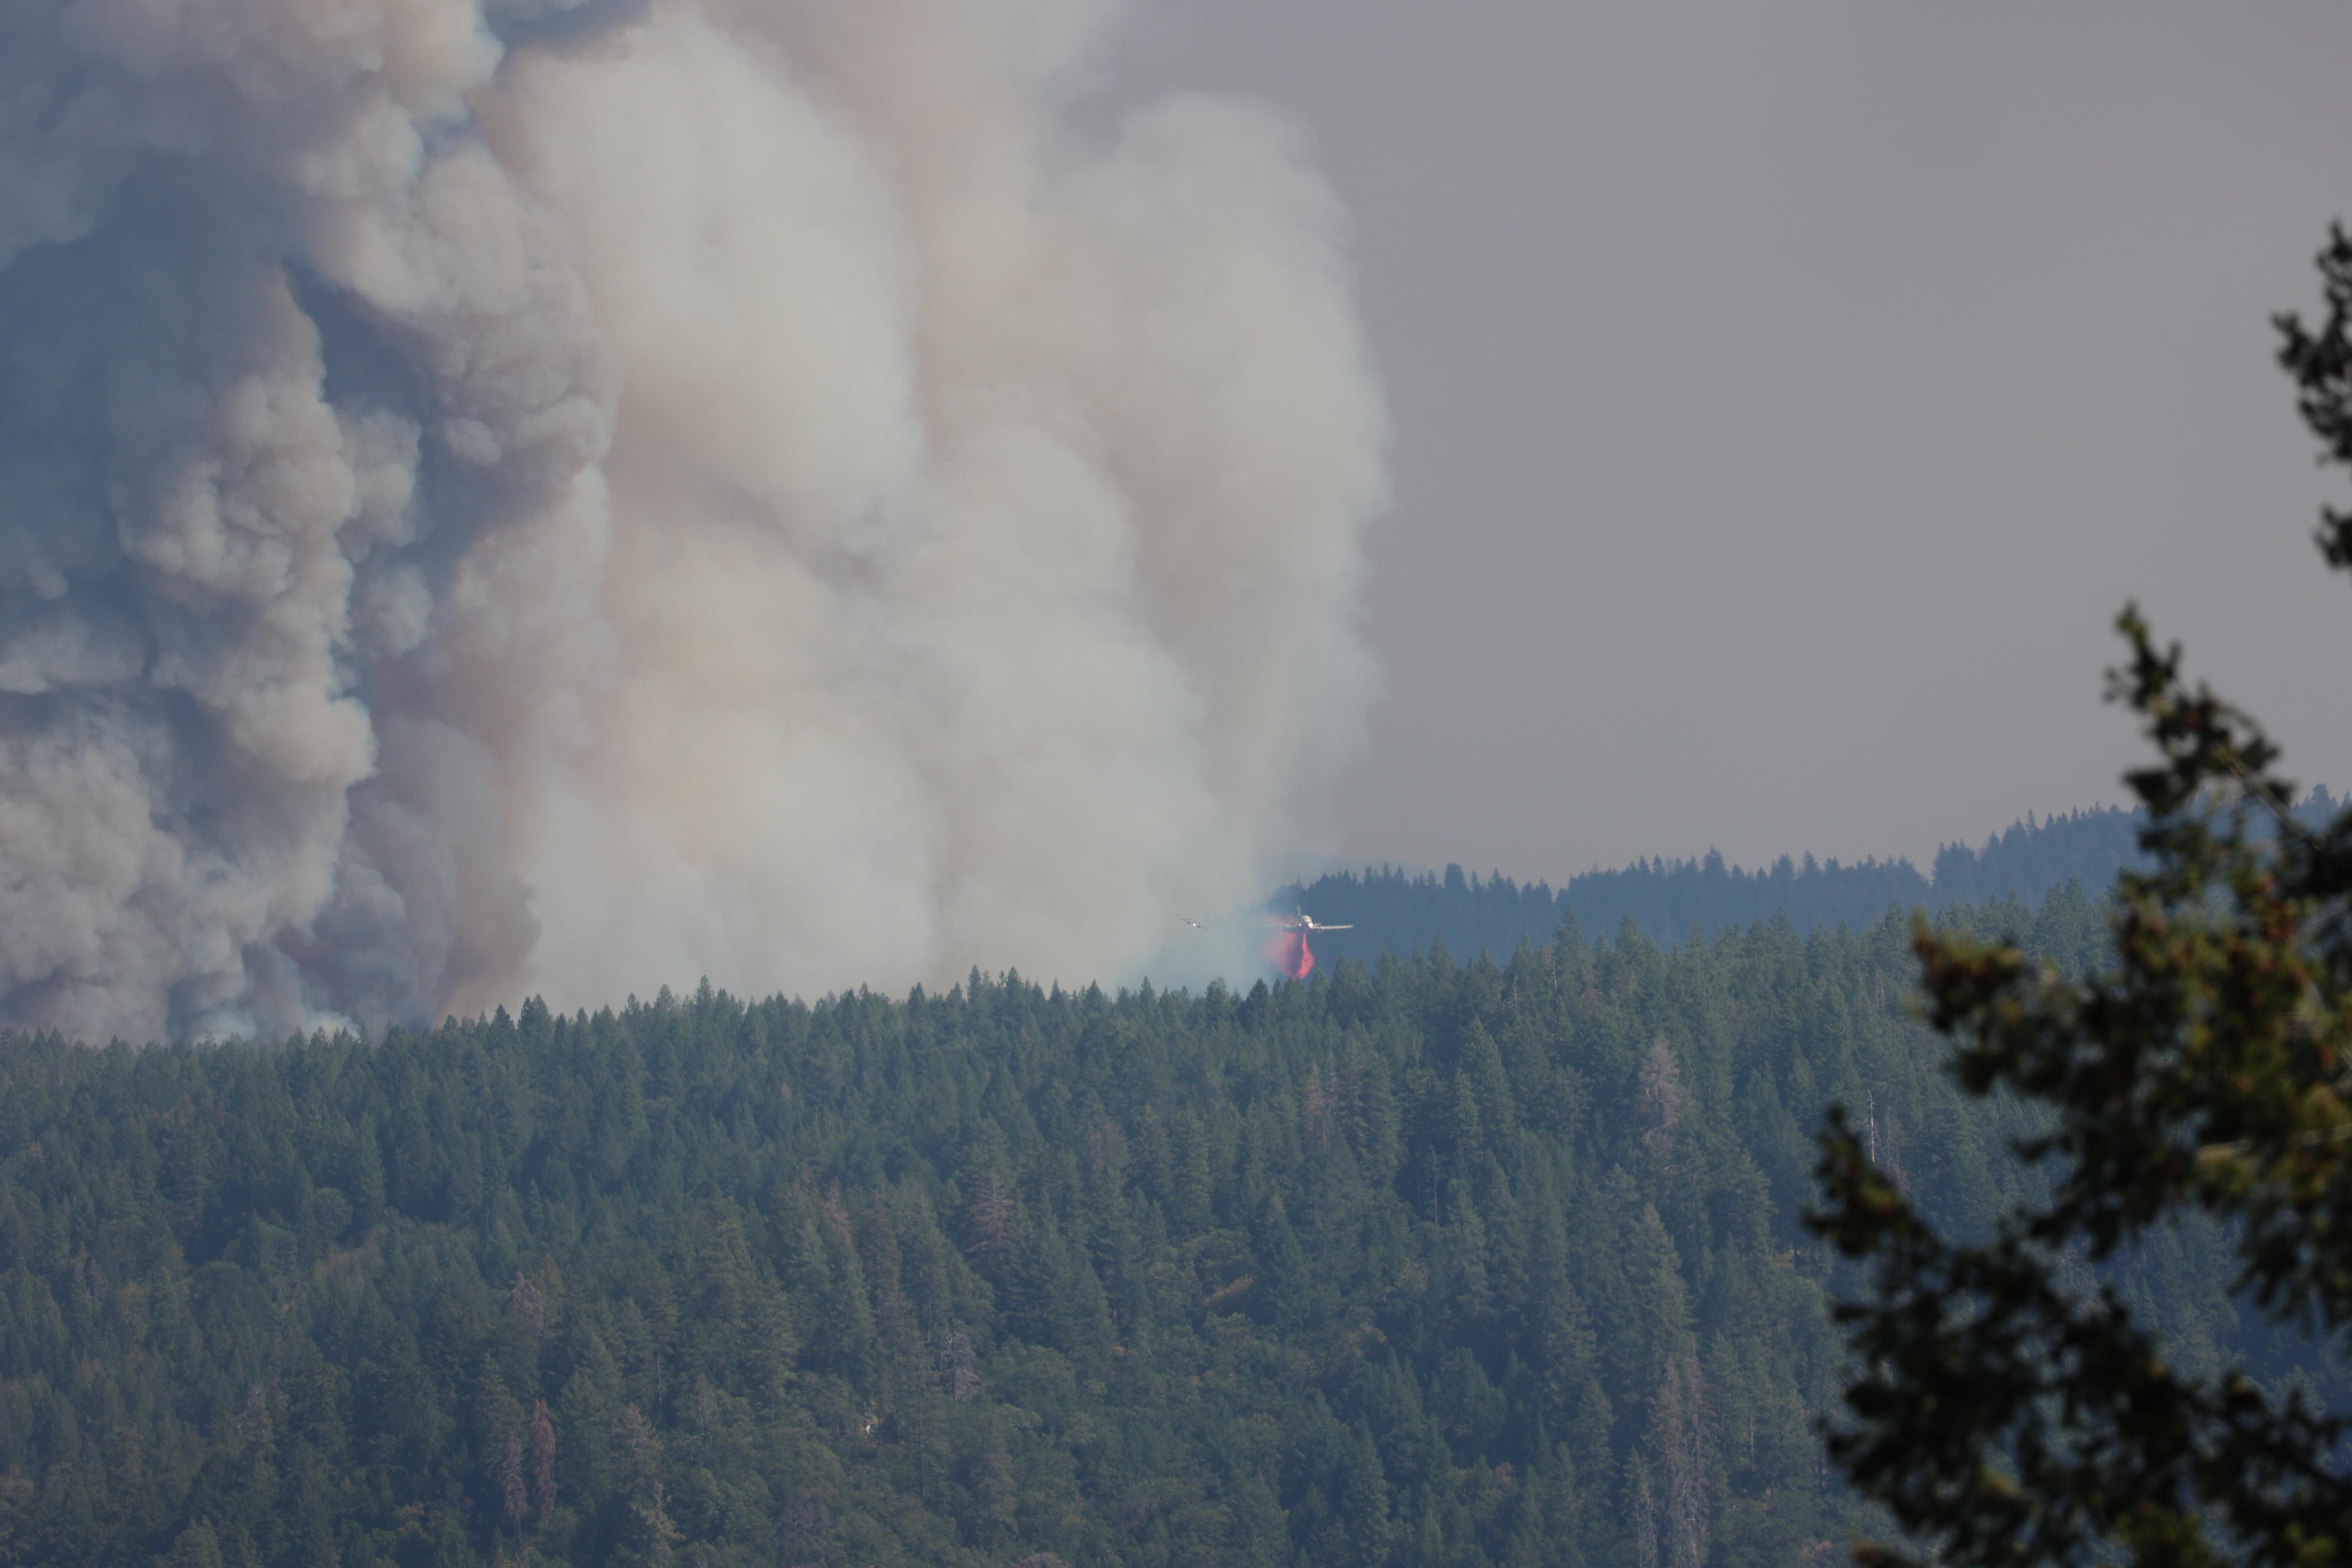 large column of dark smoke rising far into the sky as the fire burns coniferous mountain slope. an air tanker drops pink retardant on the edge of thick smoke